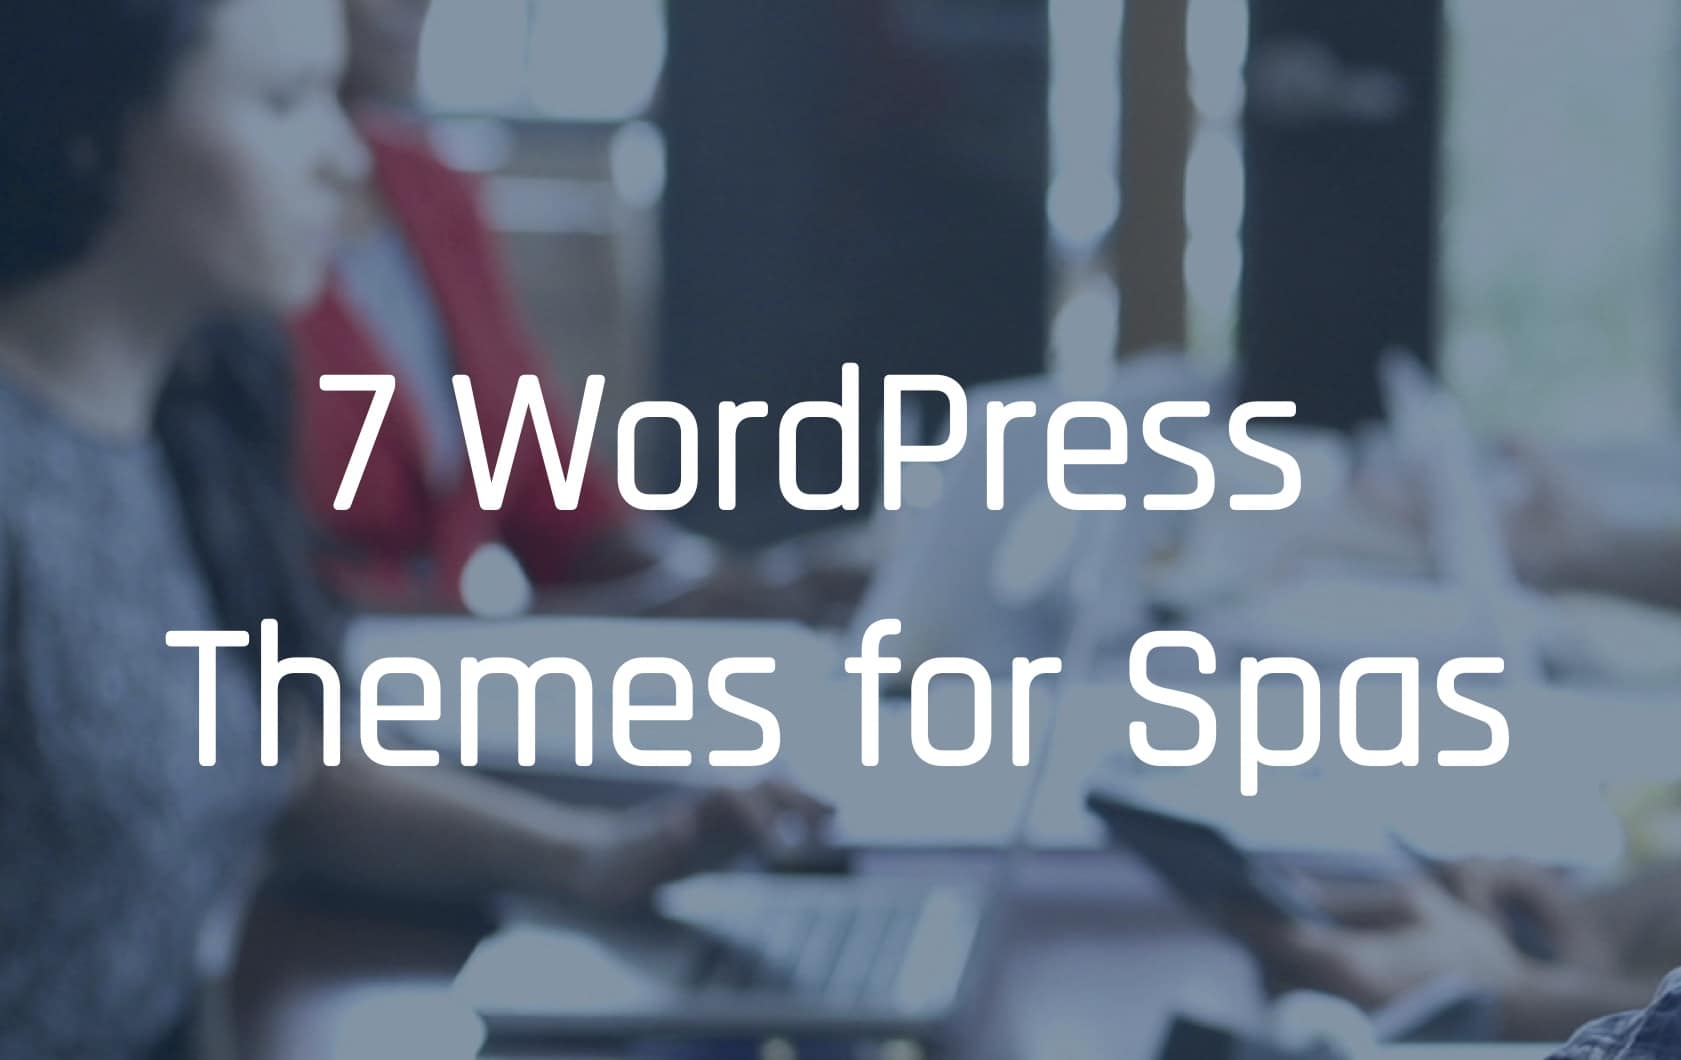 A person is scrolling through seven WordPress themes for spas on a screenshot.